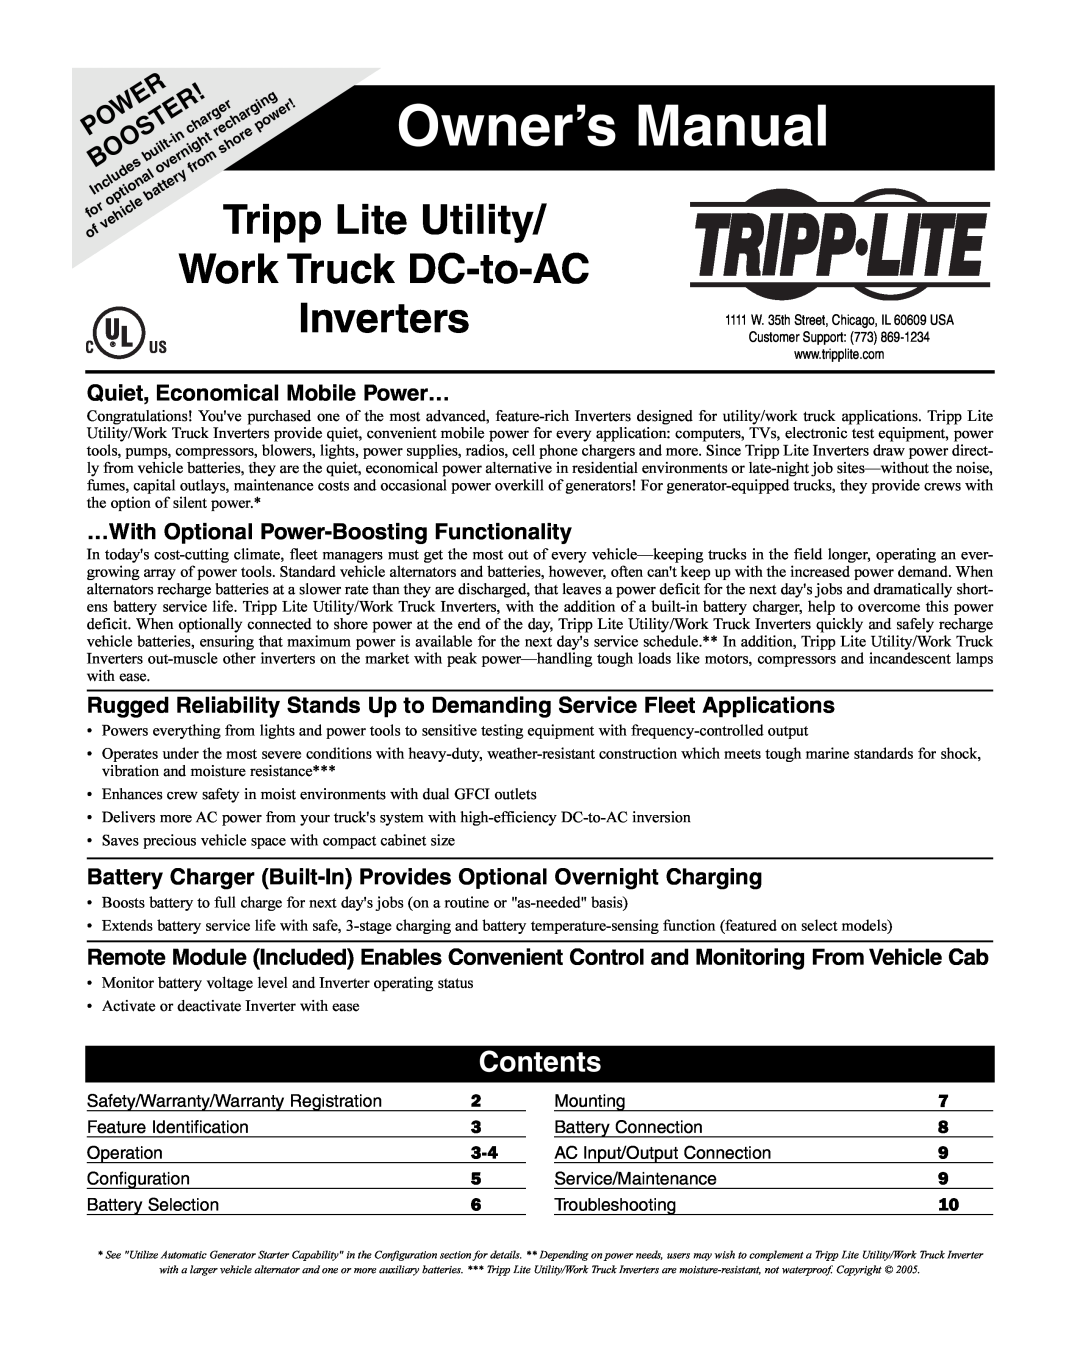 Tripp Lite UT Series owner manual Contents, Quiet, Economical Mobile Power…, …With Optional Power-Boosting Functionality 